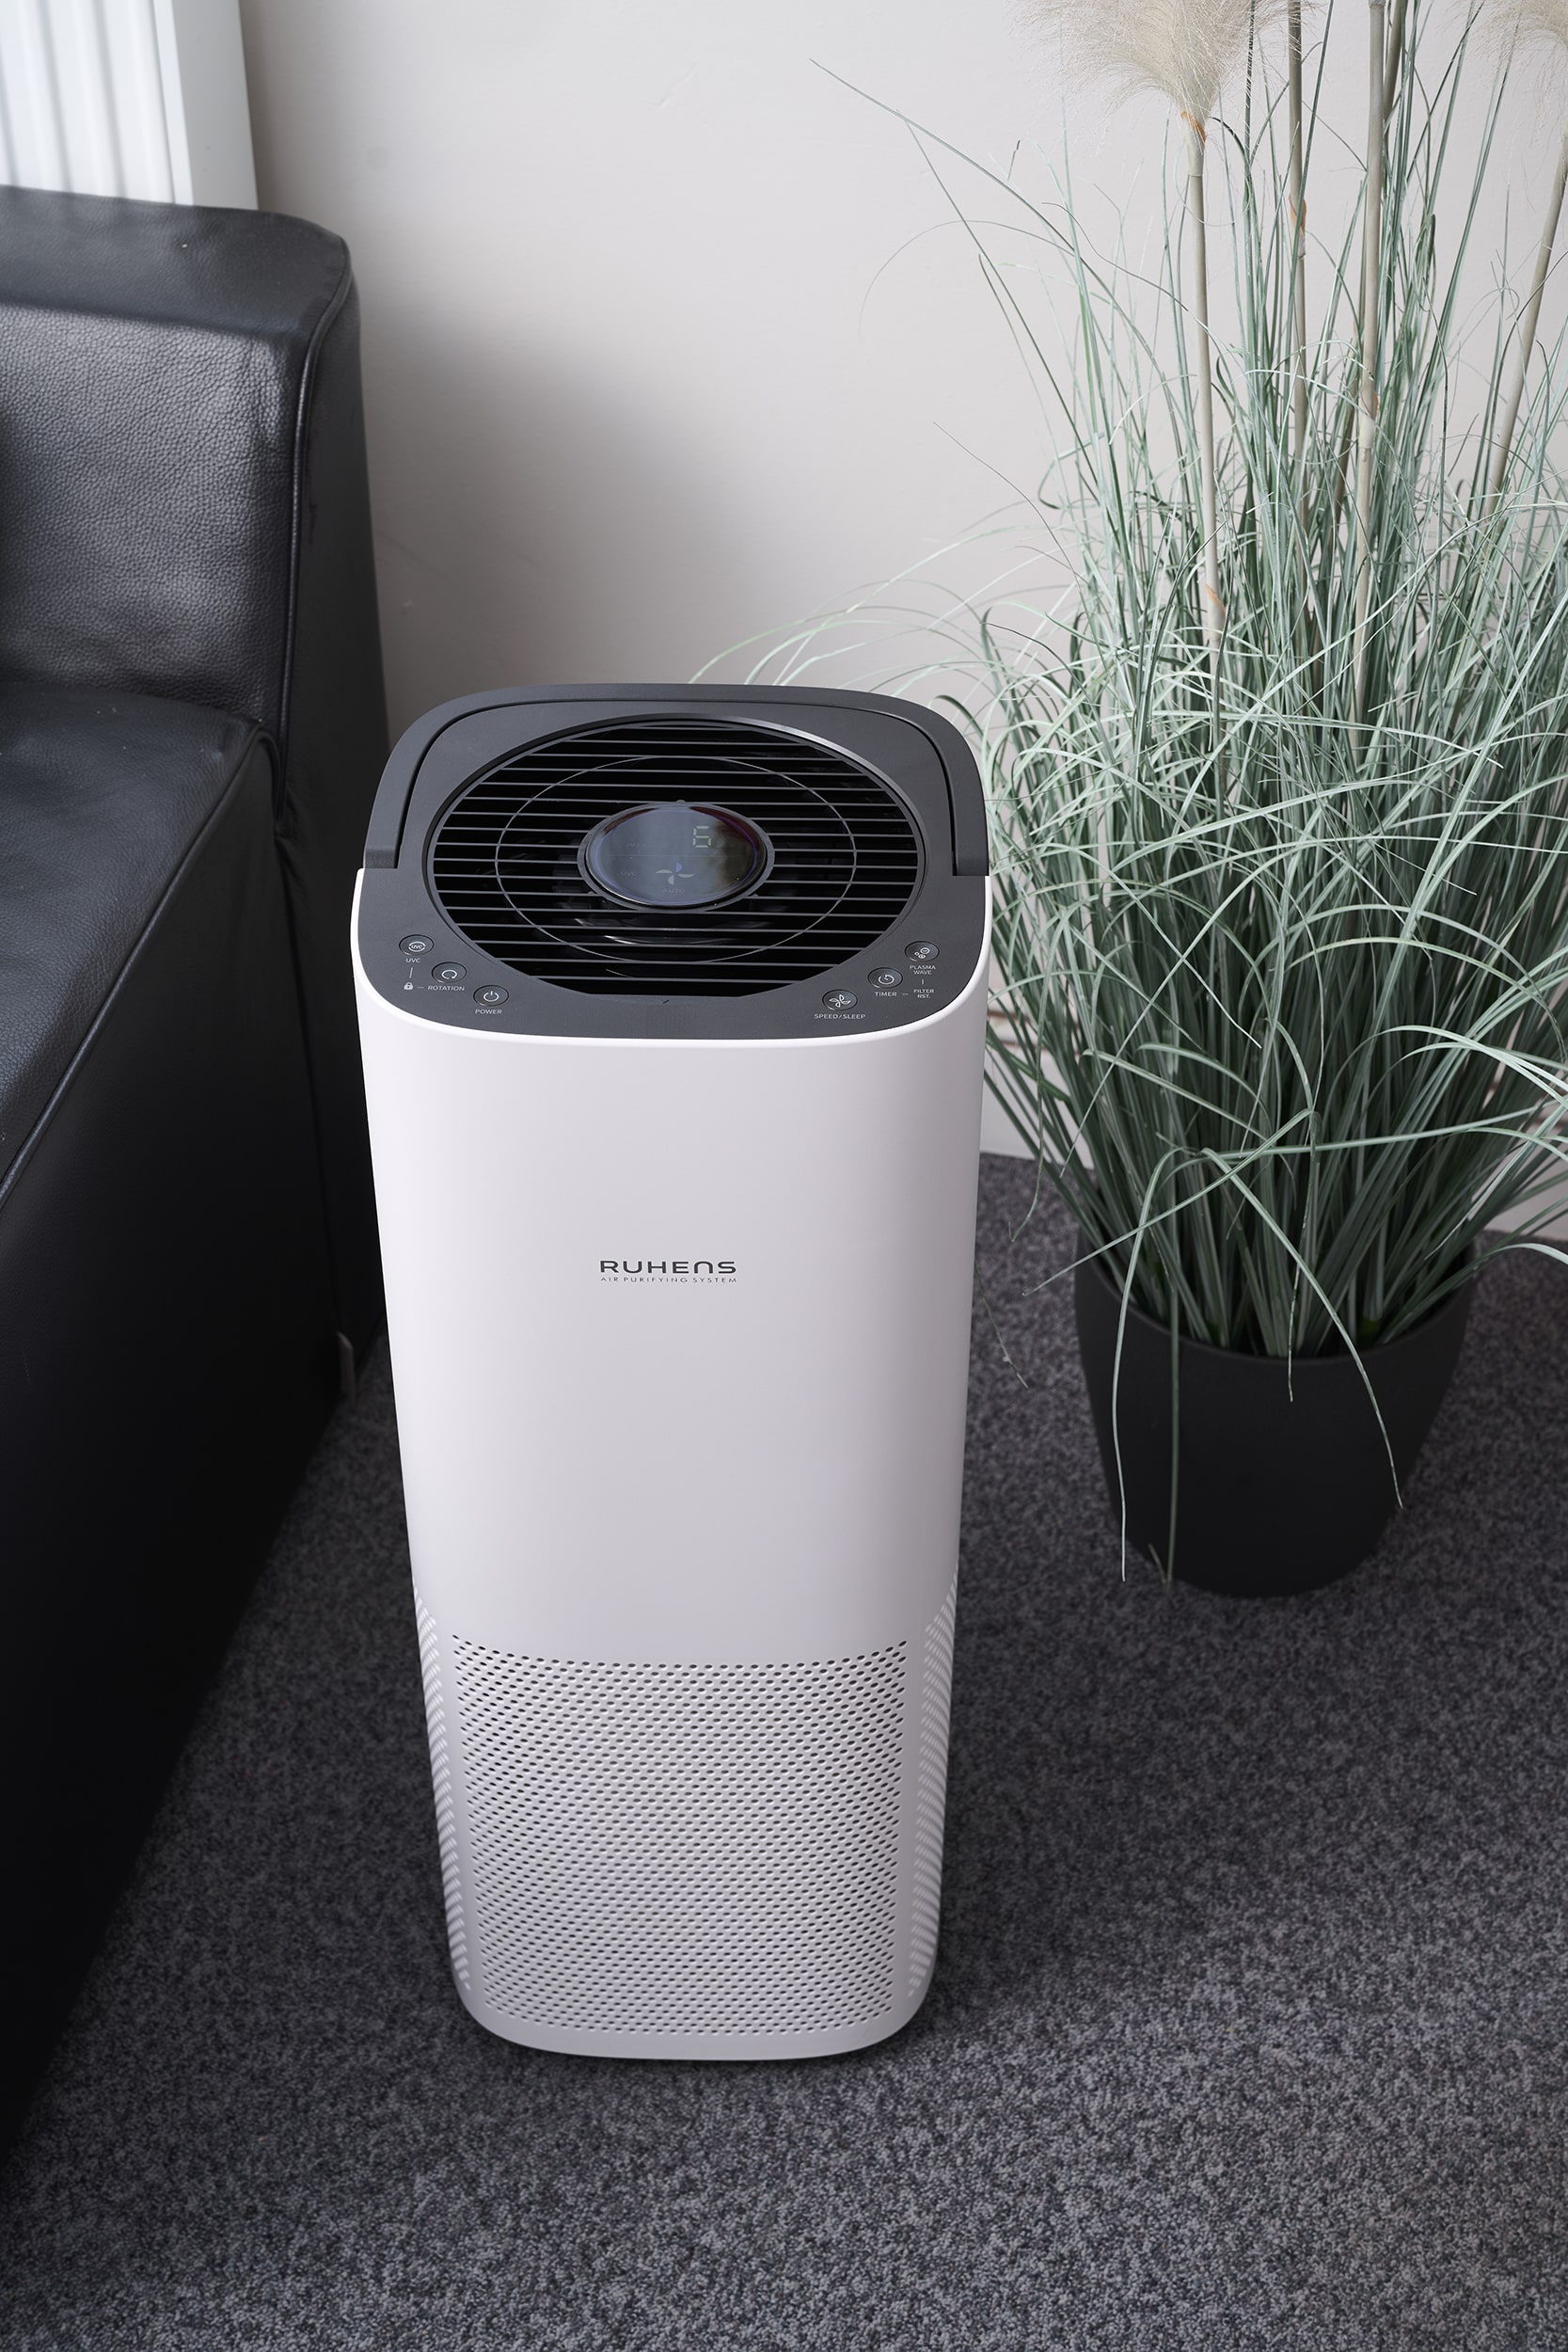 Home Dust Collector Air Purifier. 6 Advantages, dust filter